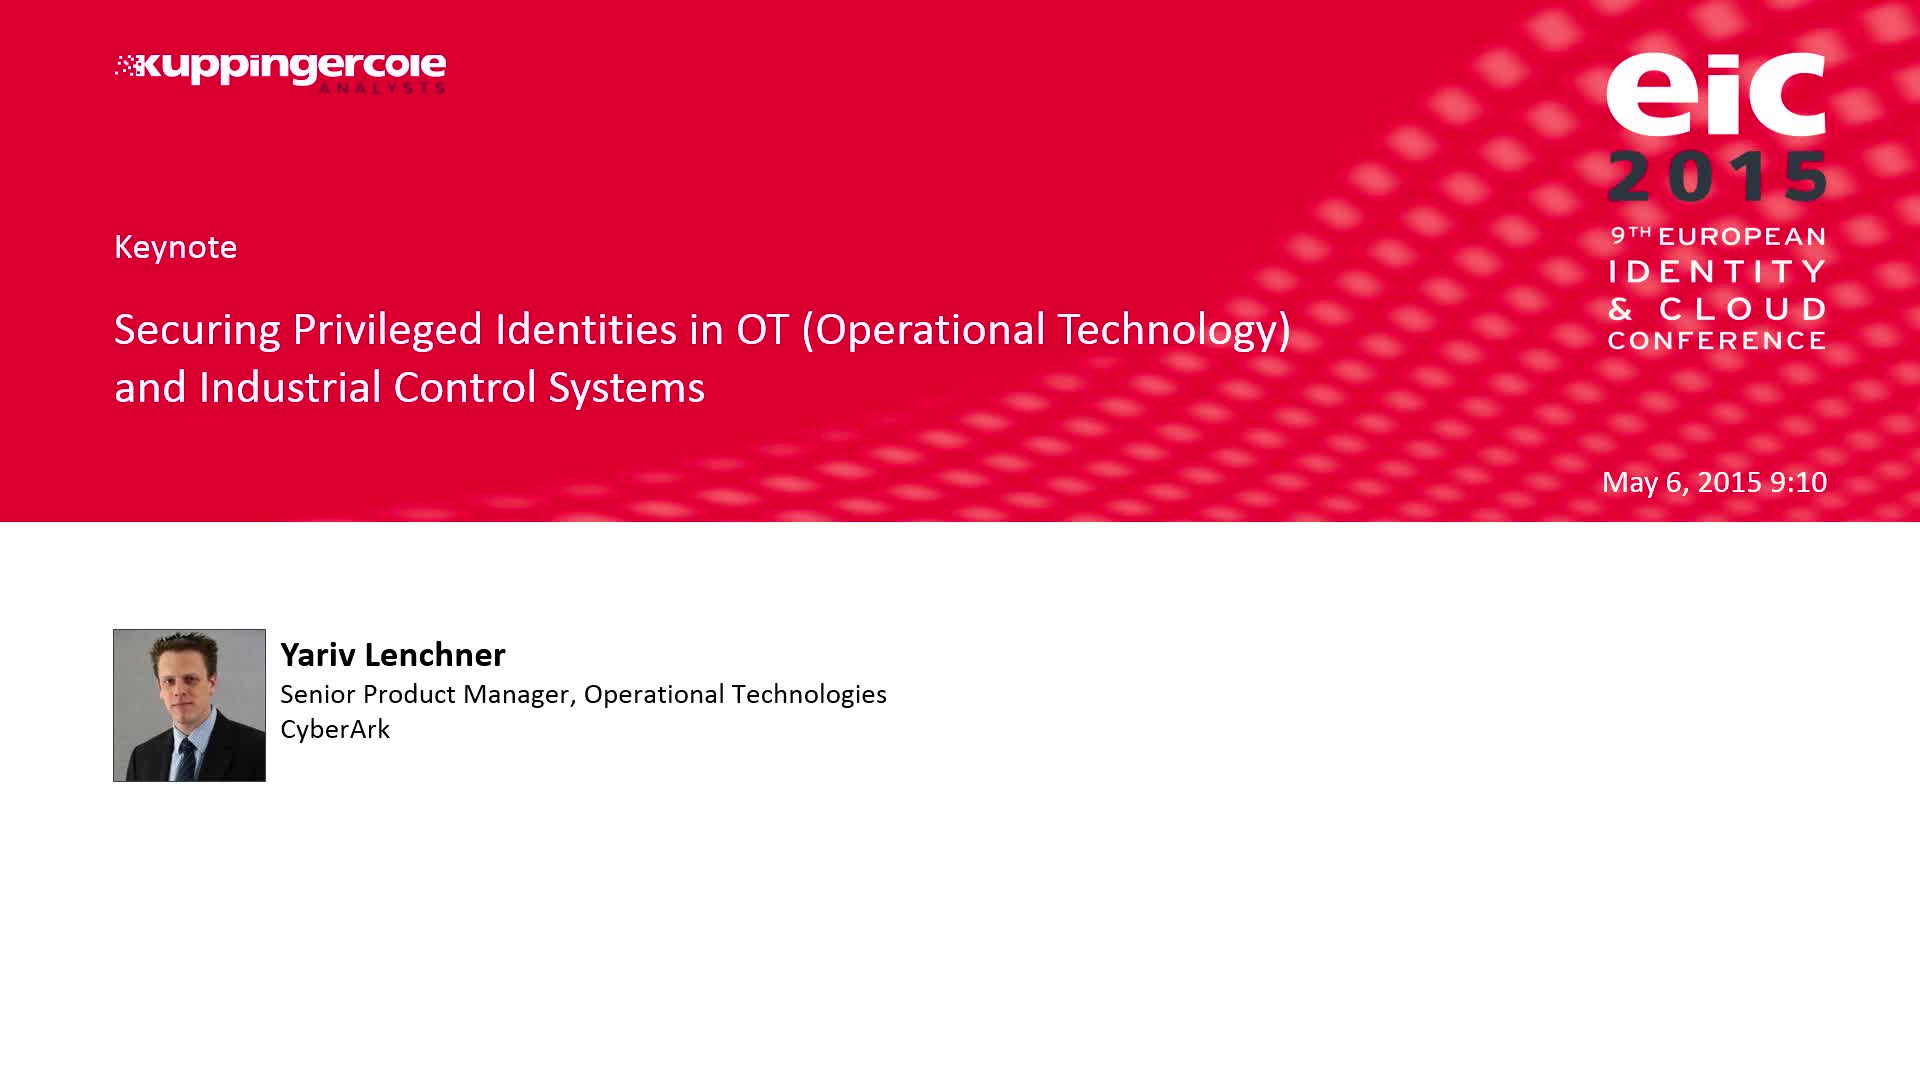 Yariv Lenchner - Securing Privileged Identities in OT (Operational Technology) and Industrial Control Systems